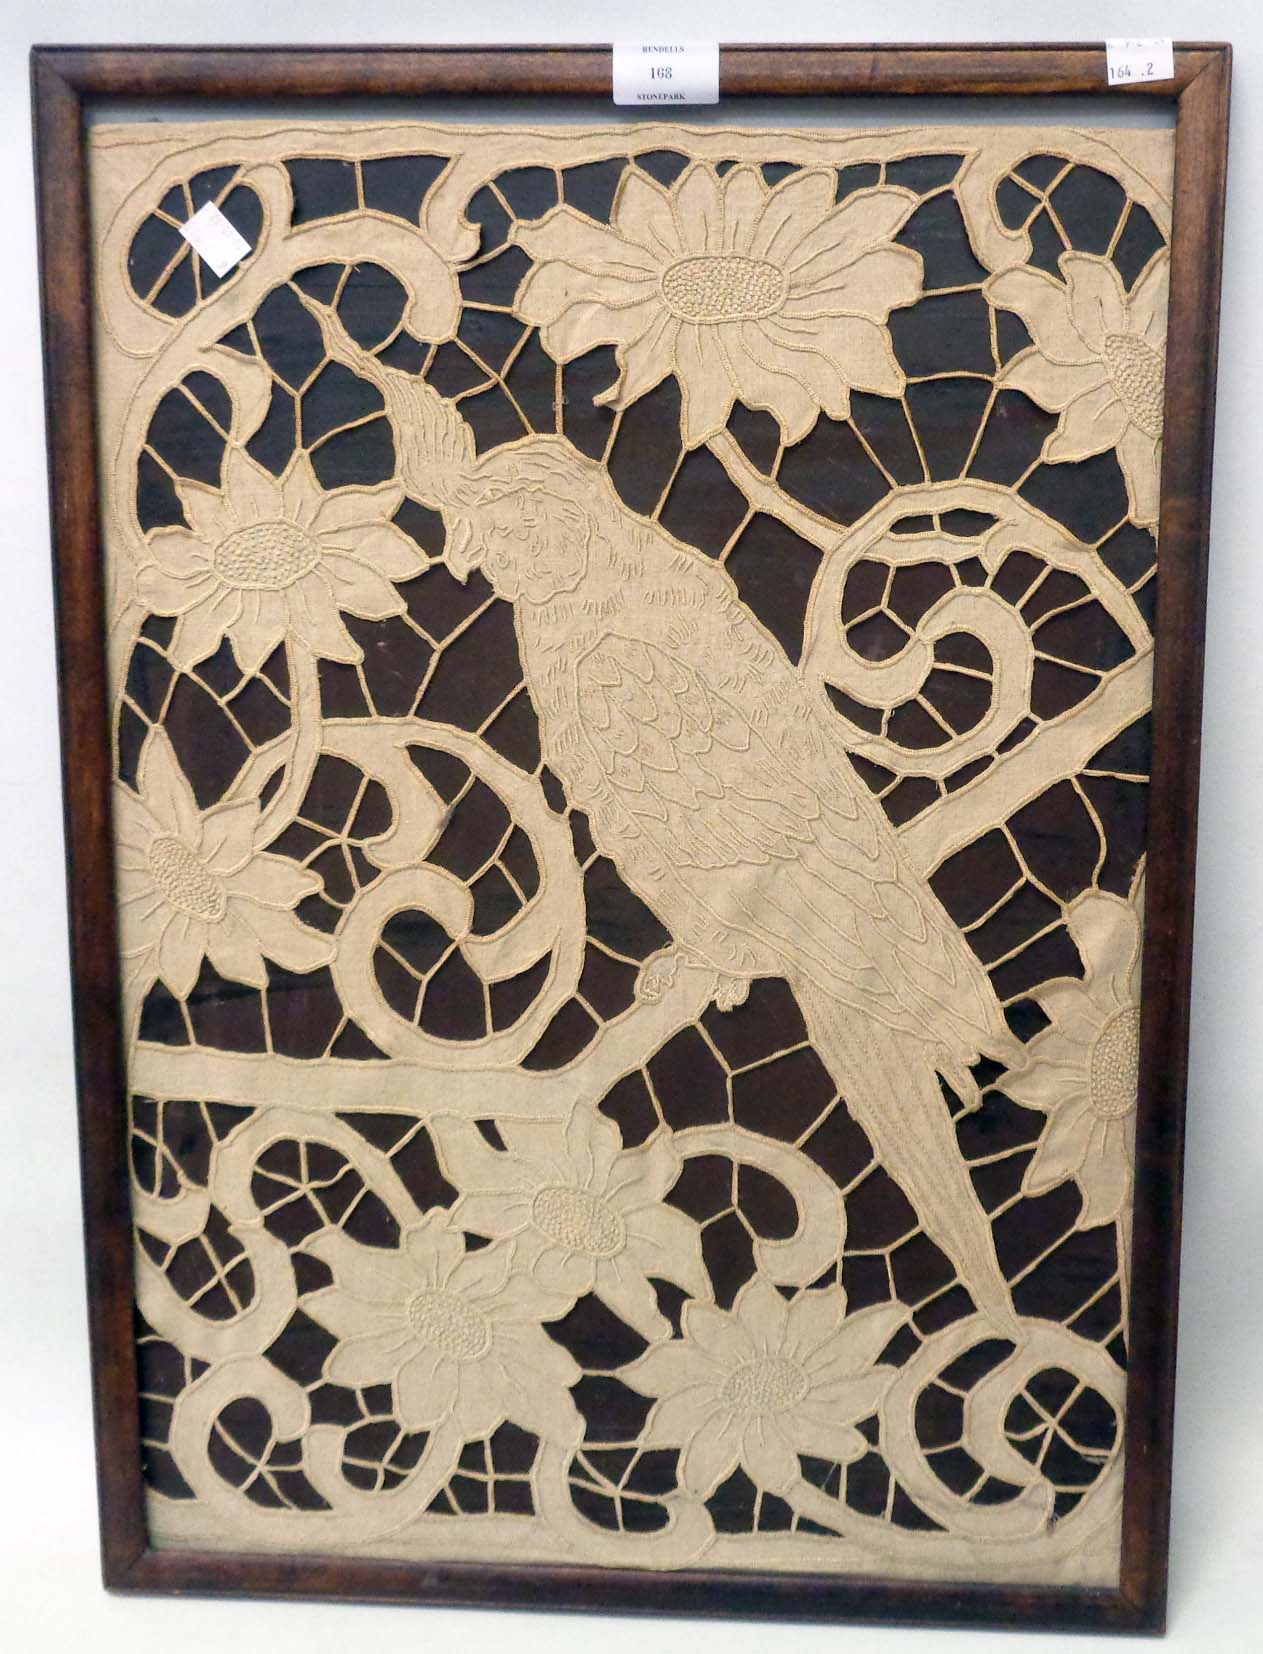 A framed embroidered lace style picture panel, depicting a perching cockatoo